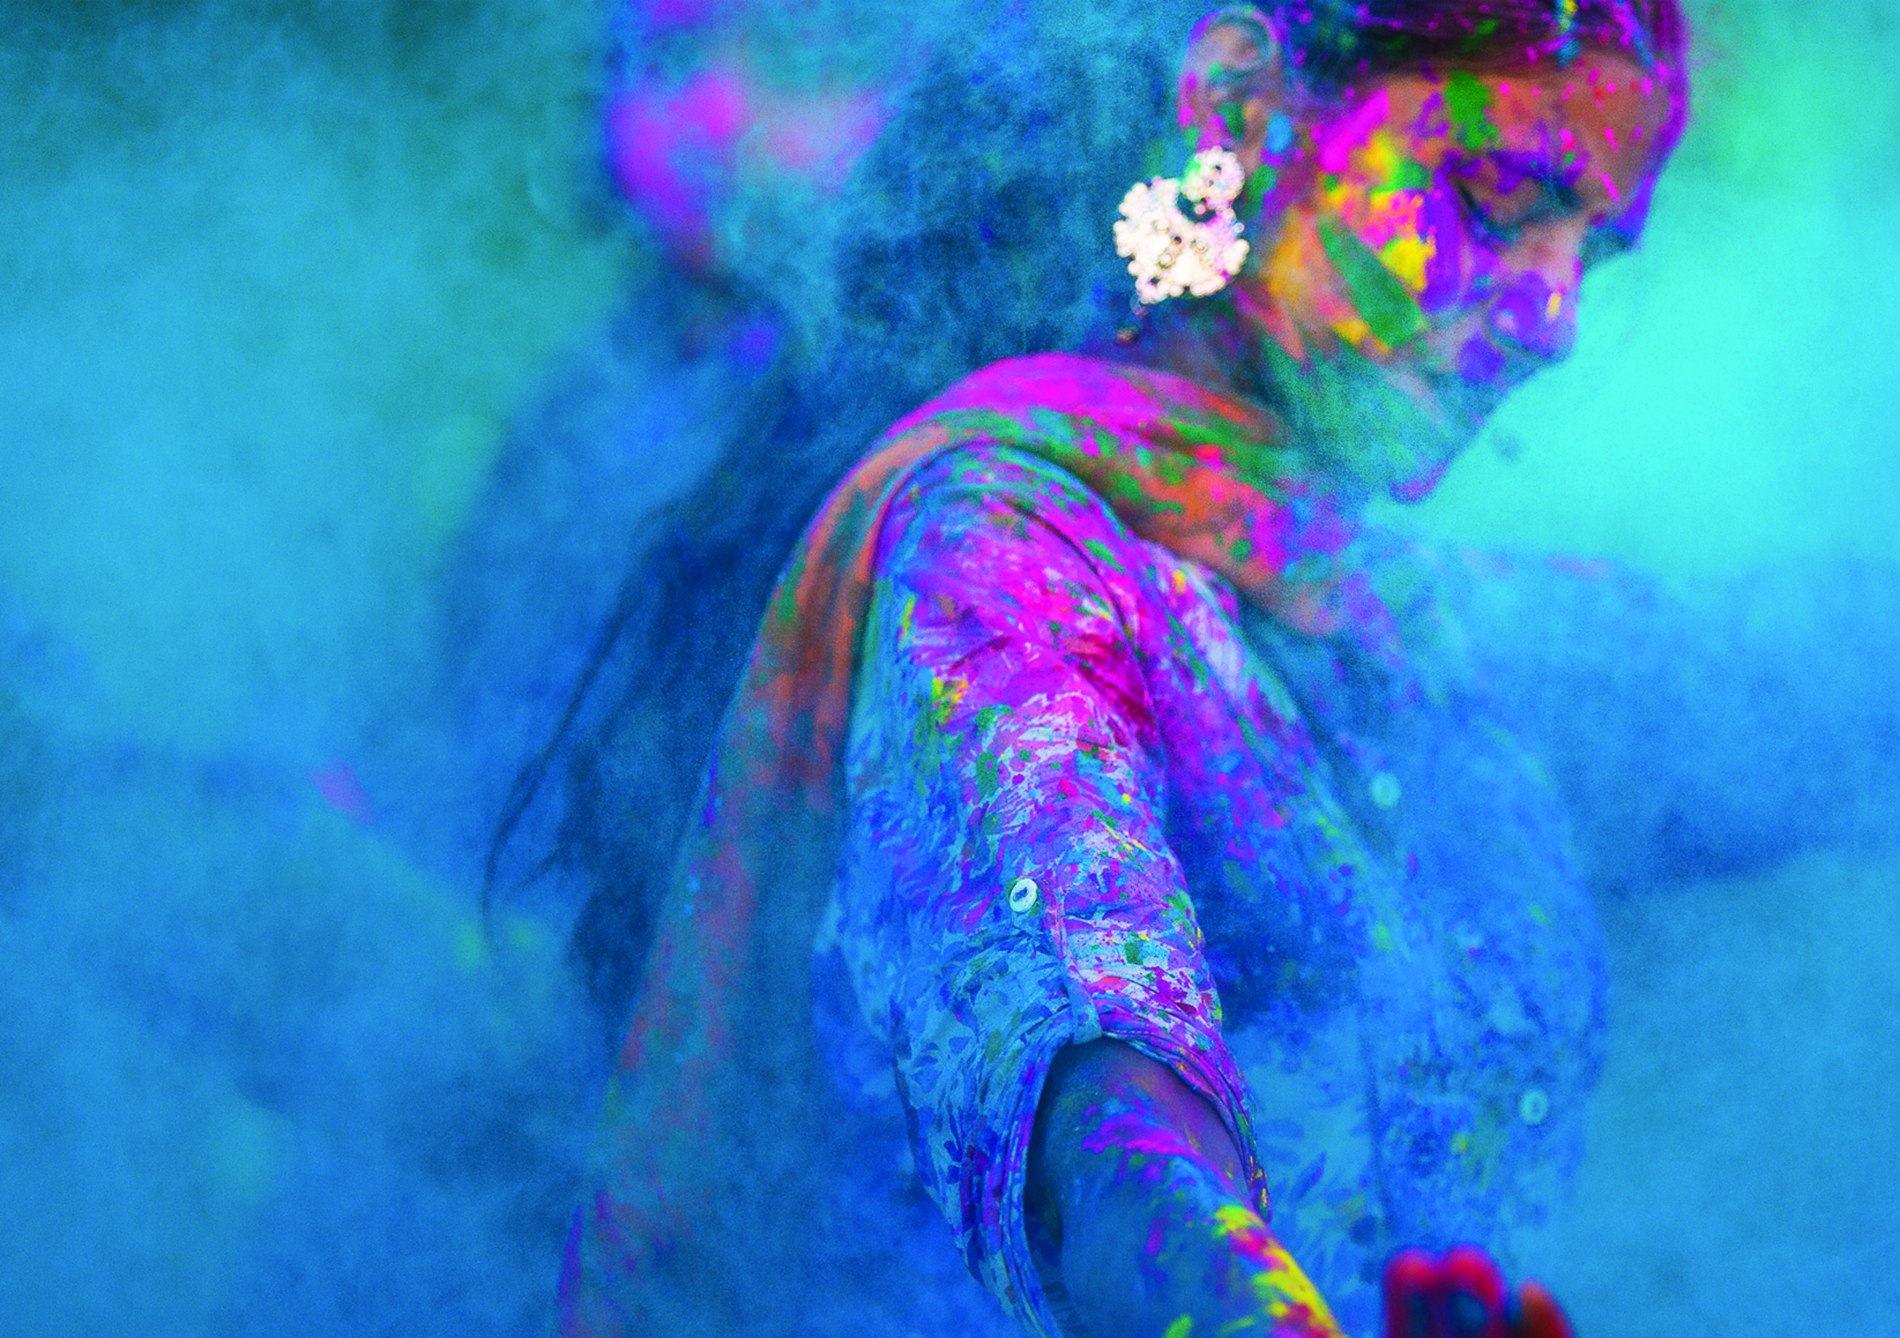 Background image used for promoting Corymbia Festival - woman doing a cultural dance in blue dust.